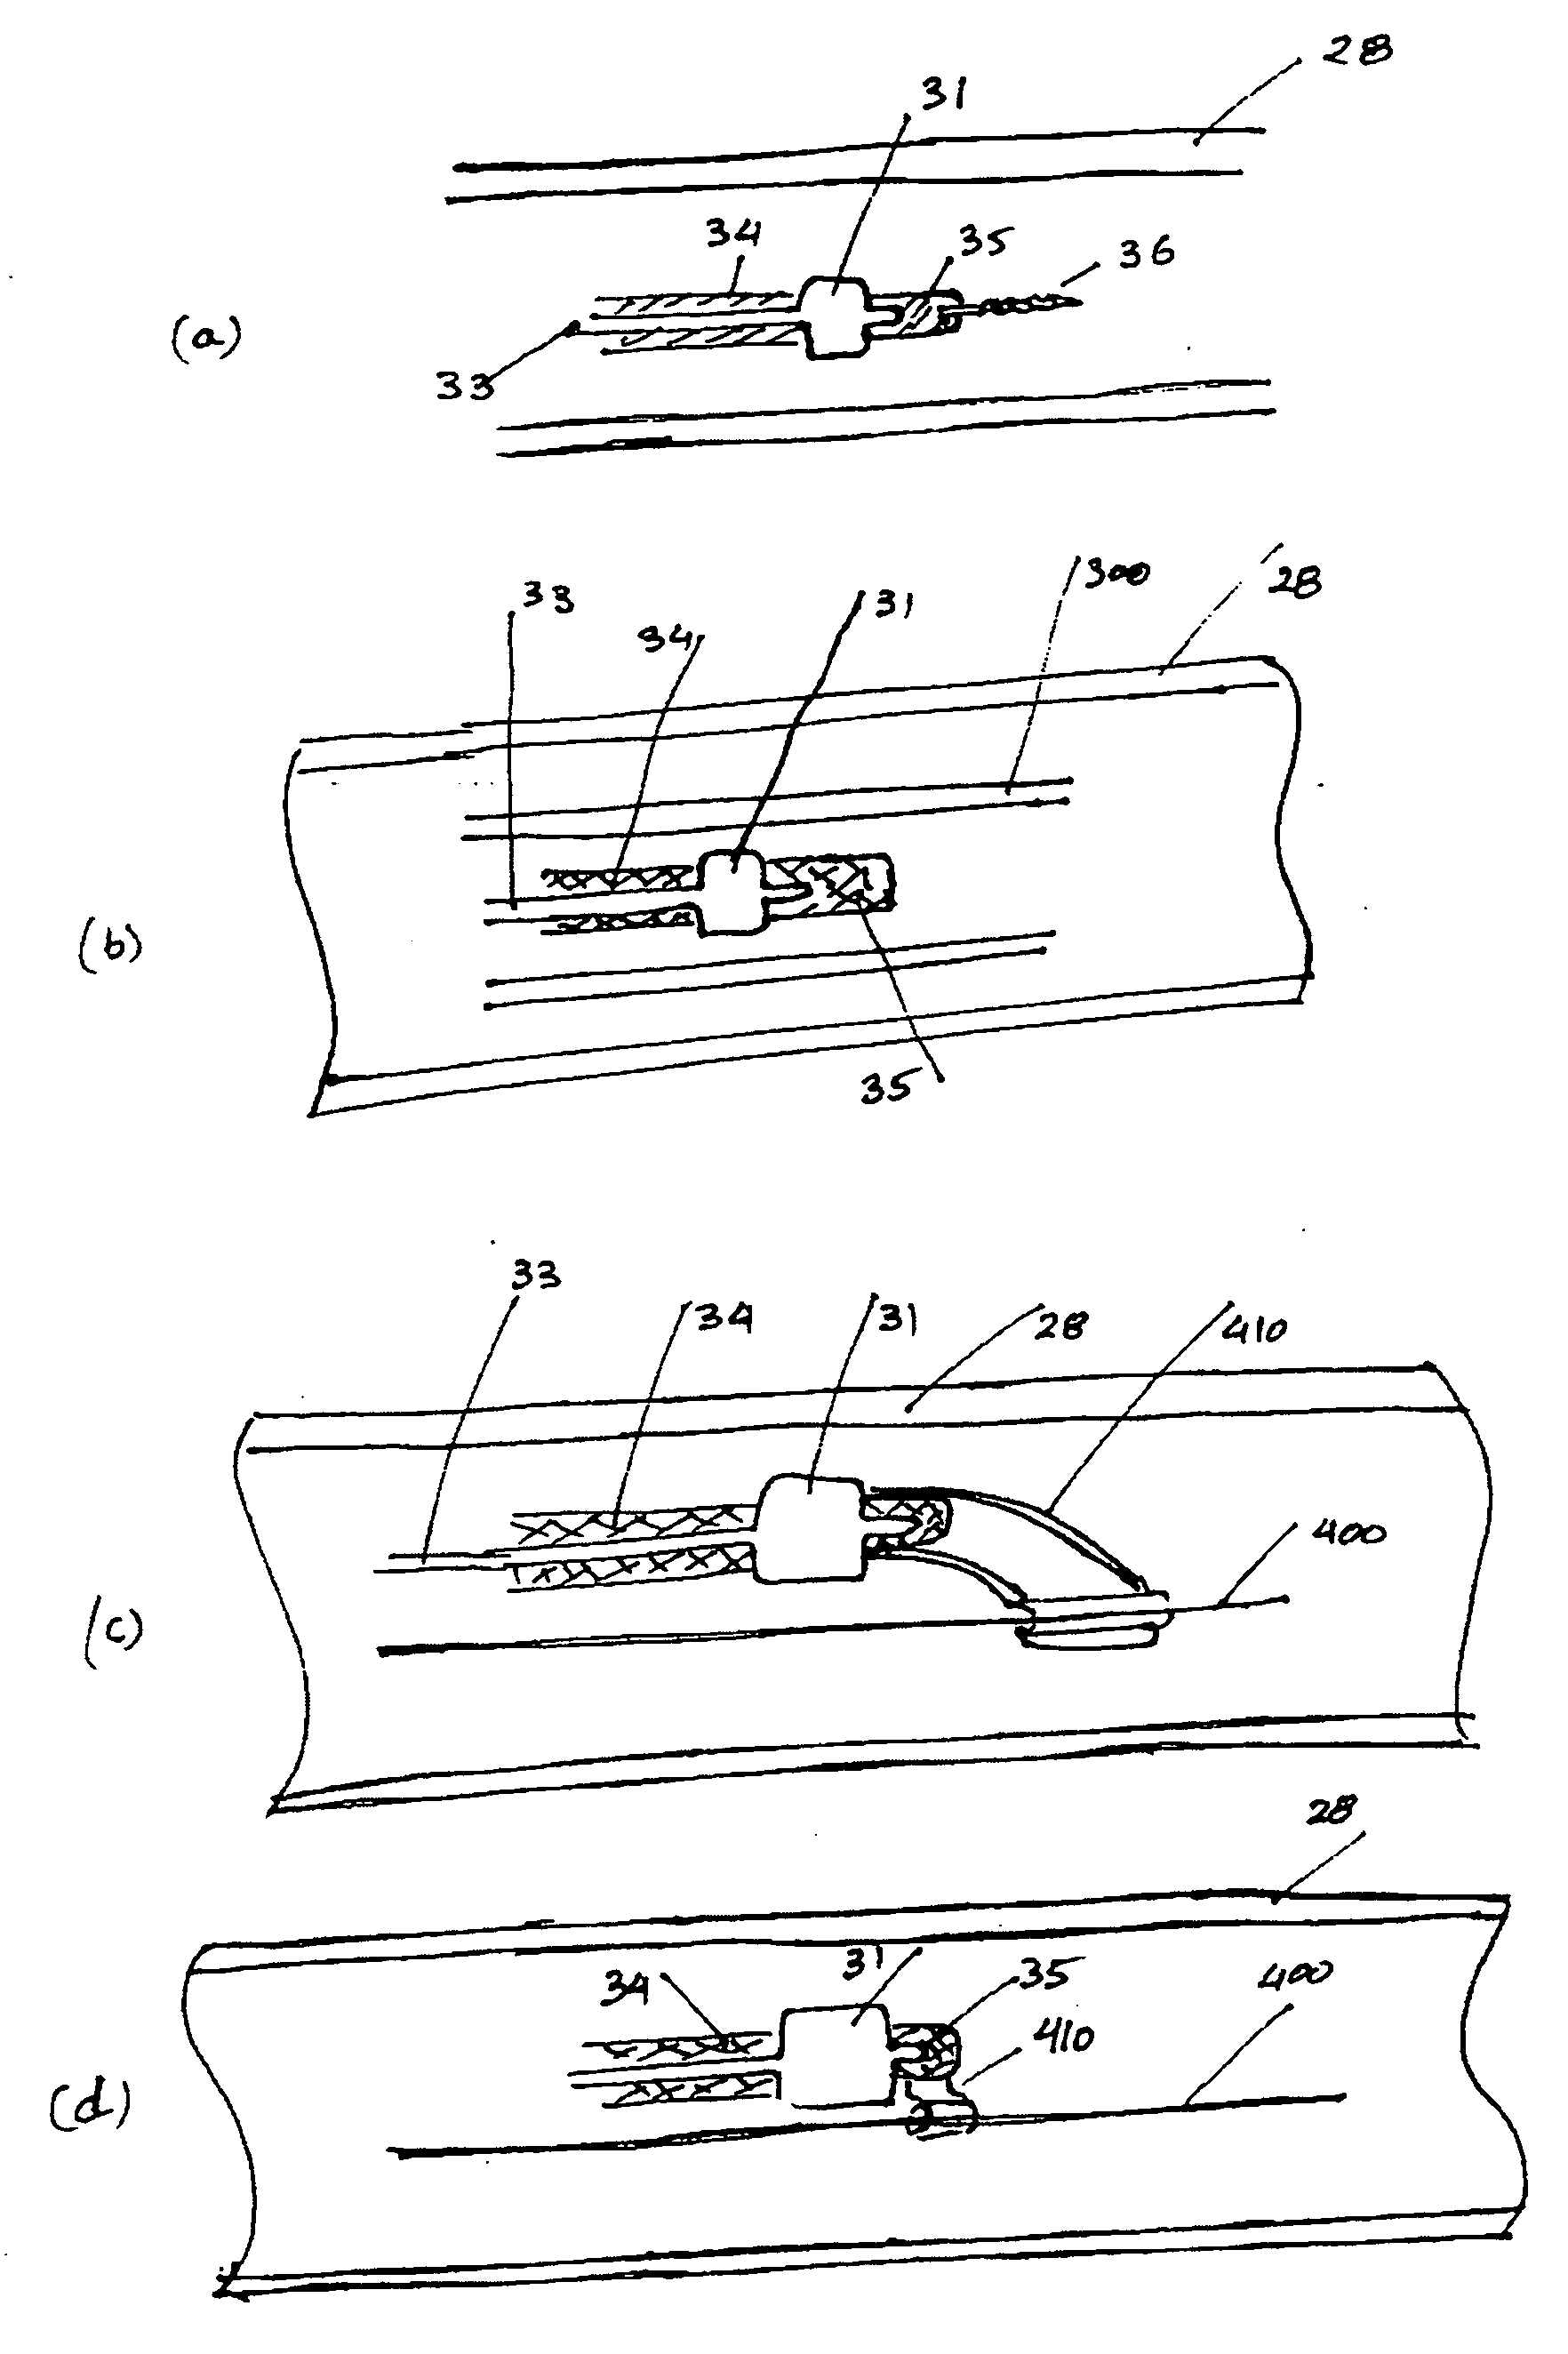 Radio-frequency device for passivation of vascular plaque and method of using same